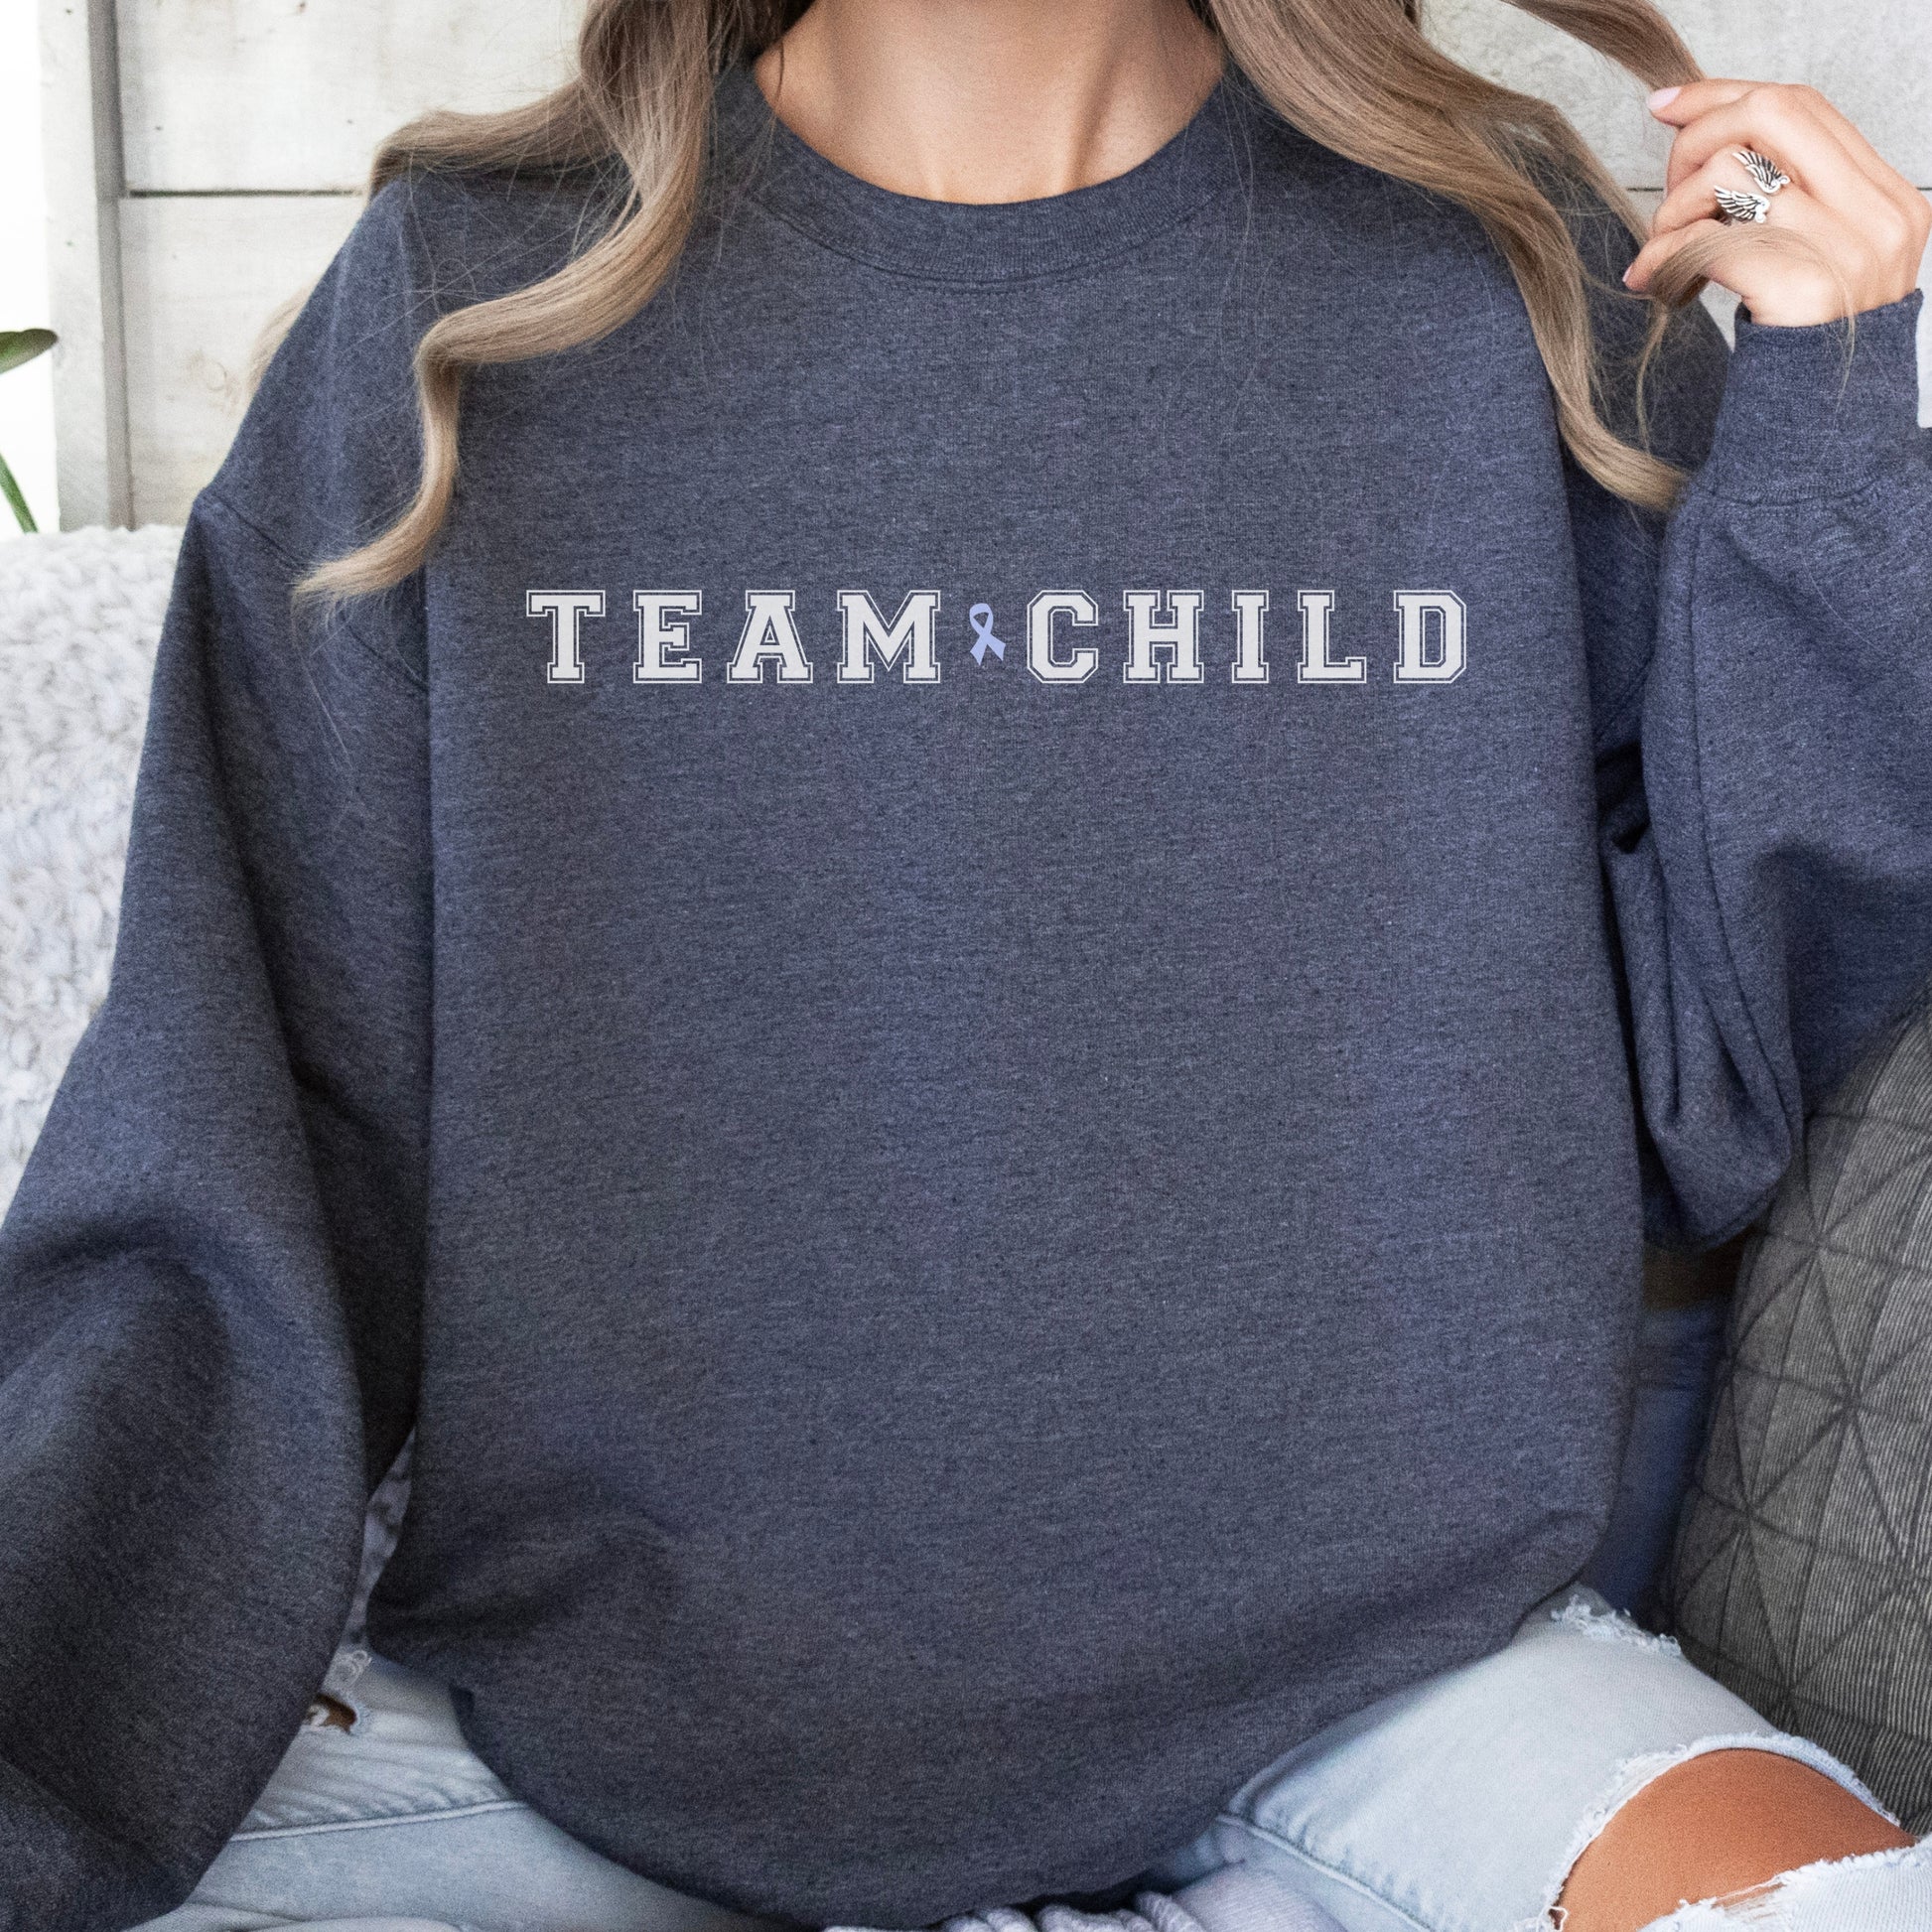 Our exclusive sweatshirt has ‘Team Child’ on the front in a bold font with the blue child abuse awareness ribbon between the words. This impactful phrase encapsulates the essence of your commitment to safeguarding children and promoting their well-being. Perfect for child advocates, champions of children’s mental health, and for Child Abuse Awareness and Prevention Month (CAPM)